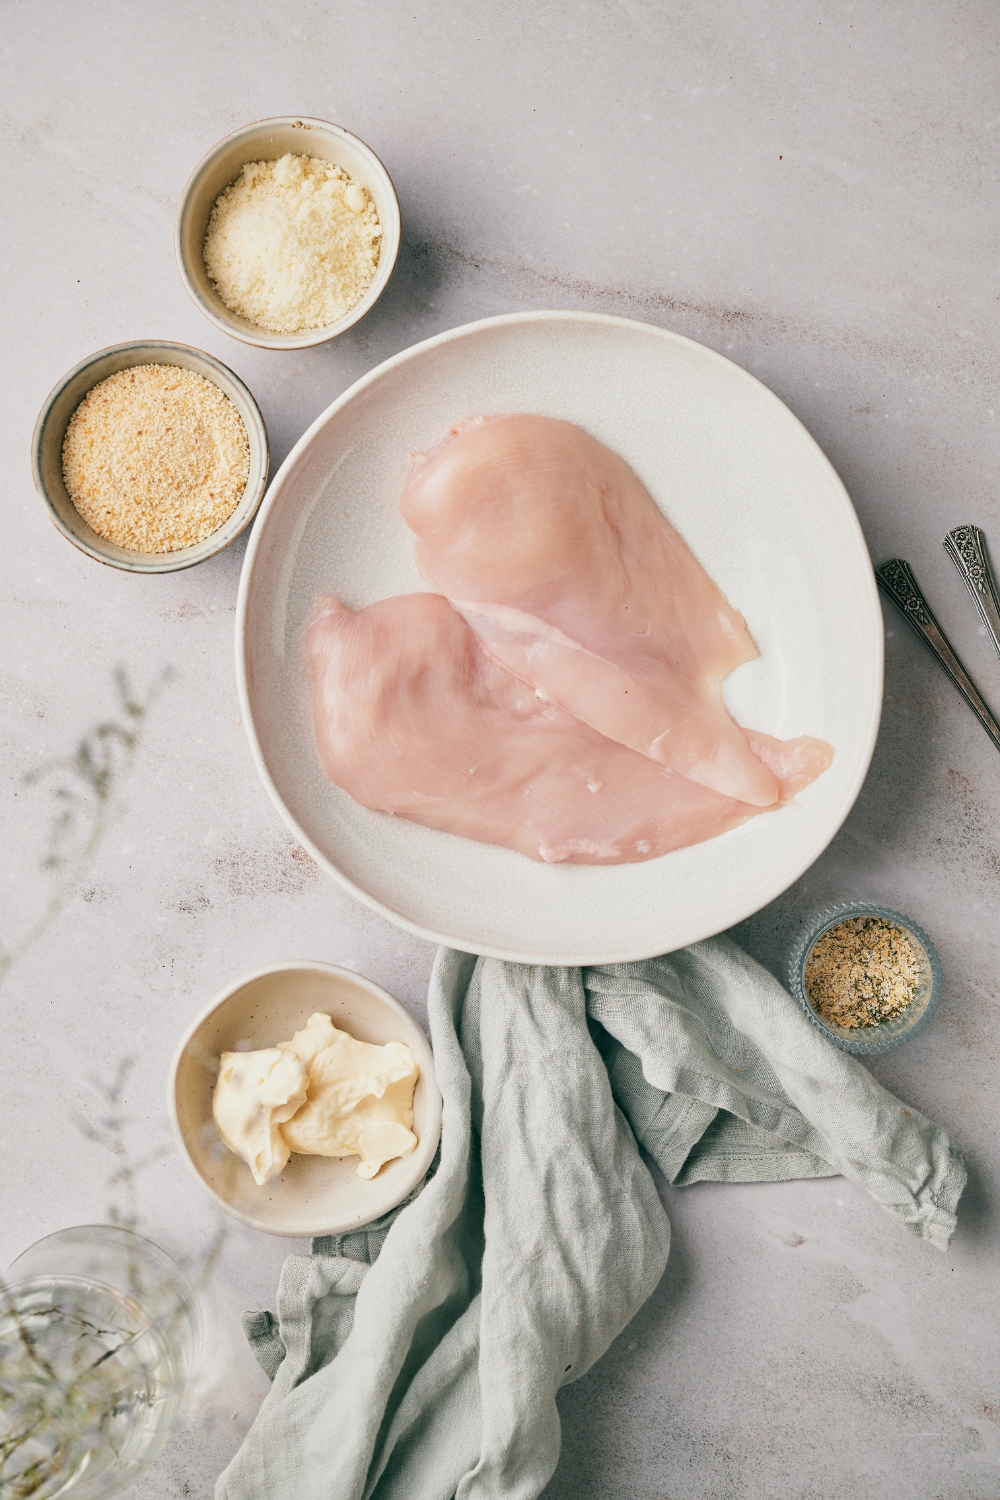 An assortment of ingredients including two raw chicken breasts on a plate next to bowls of breadcrumbs, parmesan cheese, mayonnaise, and seasonings.